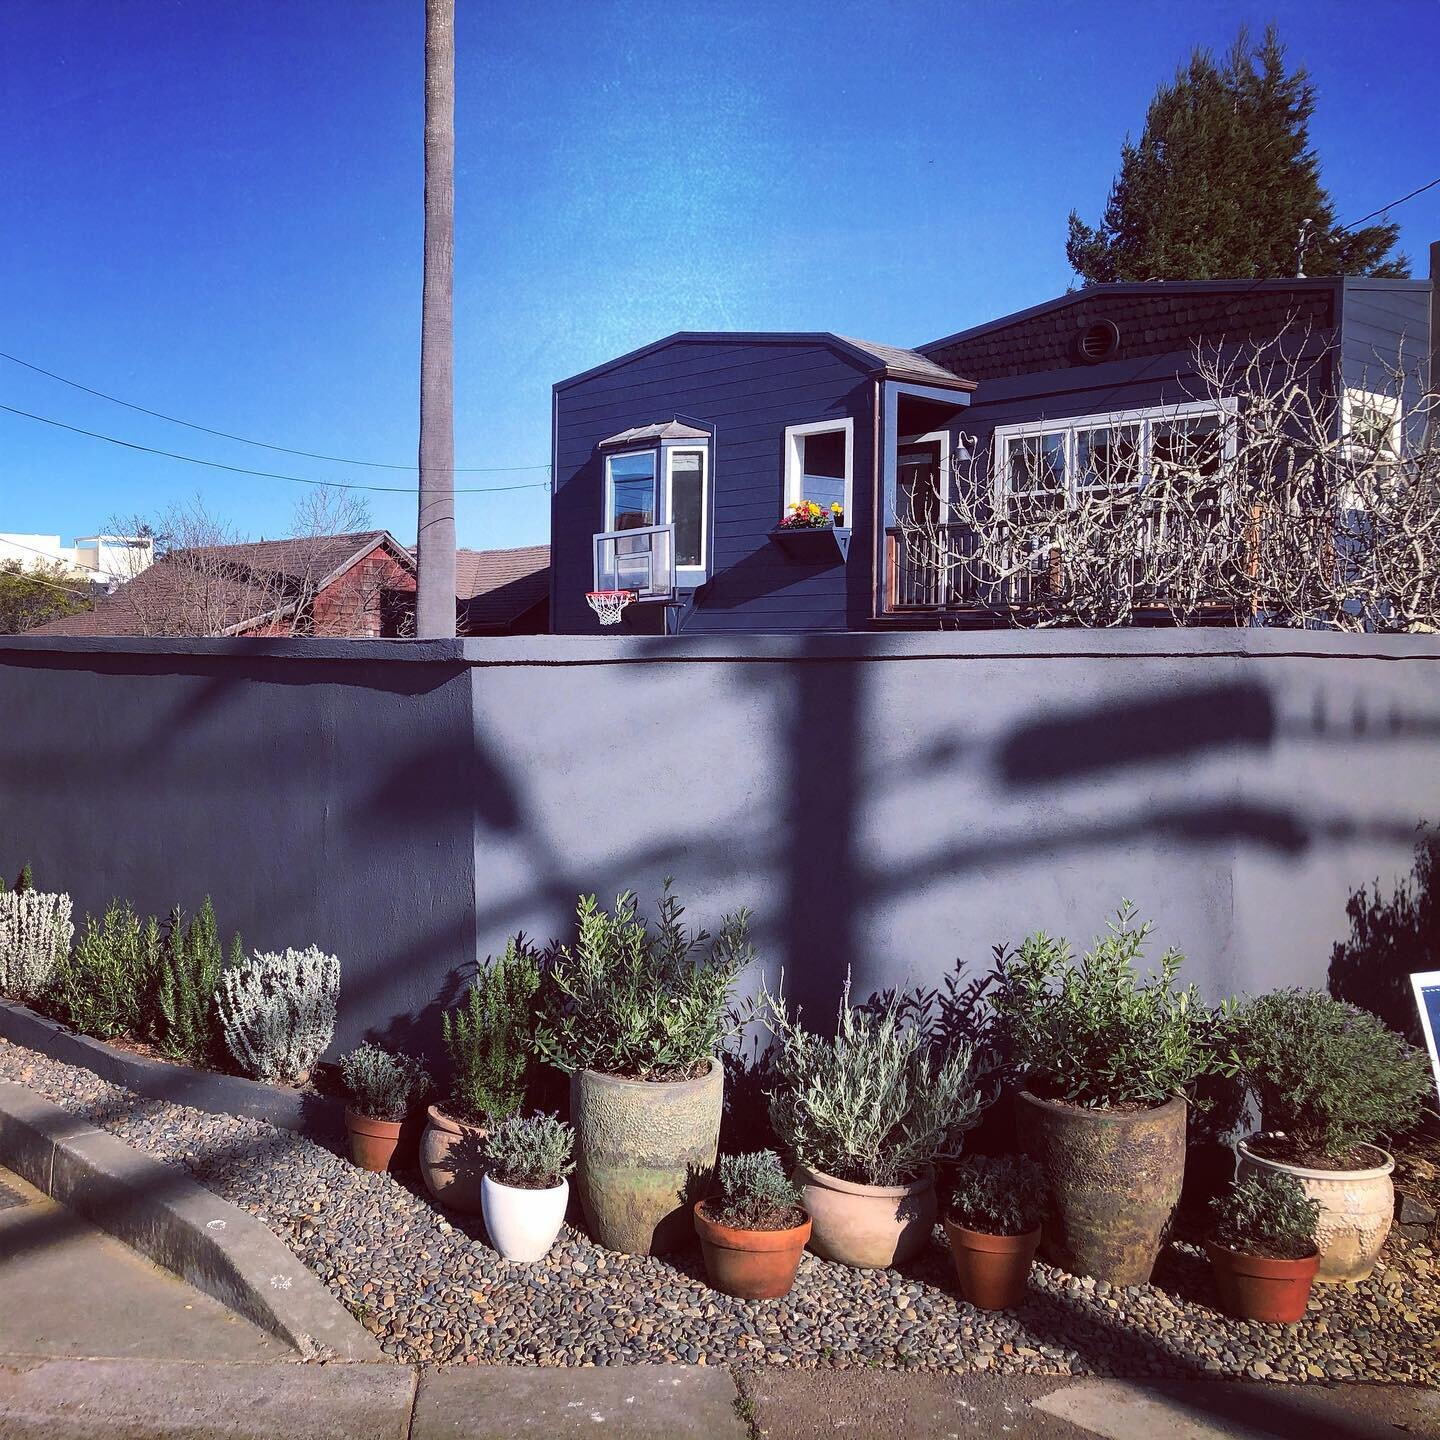 spring 2020 is fast approaching! with this project we really gave this corner property in #millvalley a big upgrade. new stucco walls with beautiful mediterranean plantings of olive trees with lavender boarders, built a small roof/deck in vibrant red